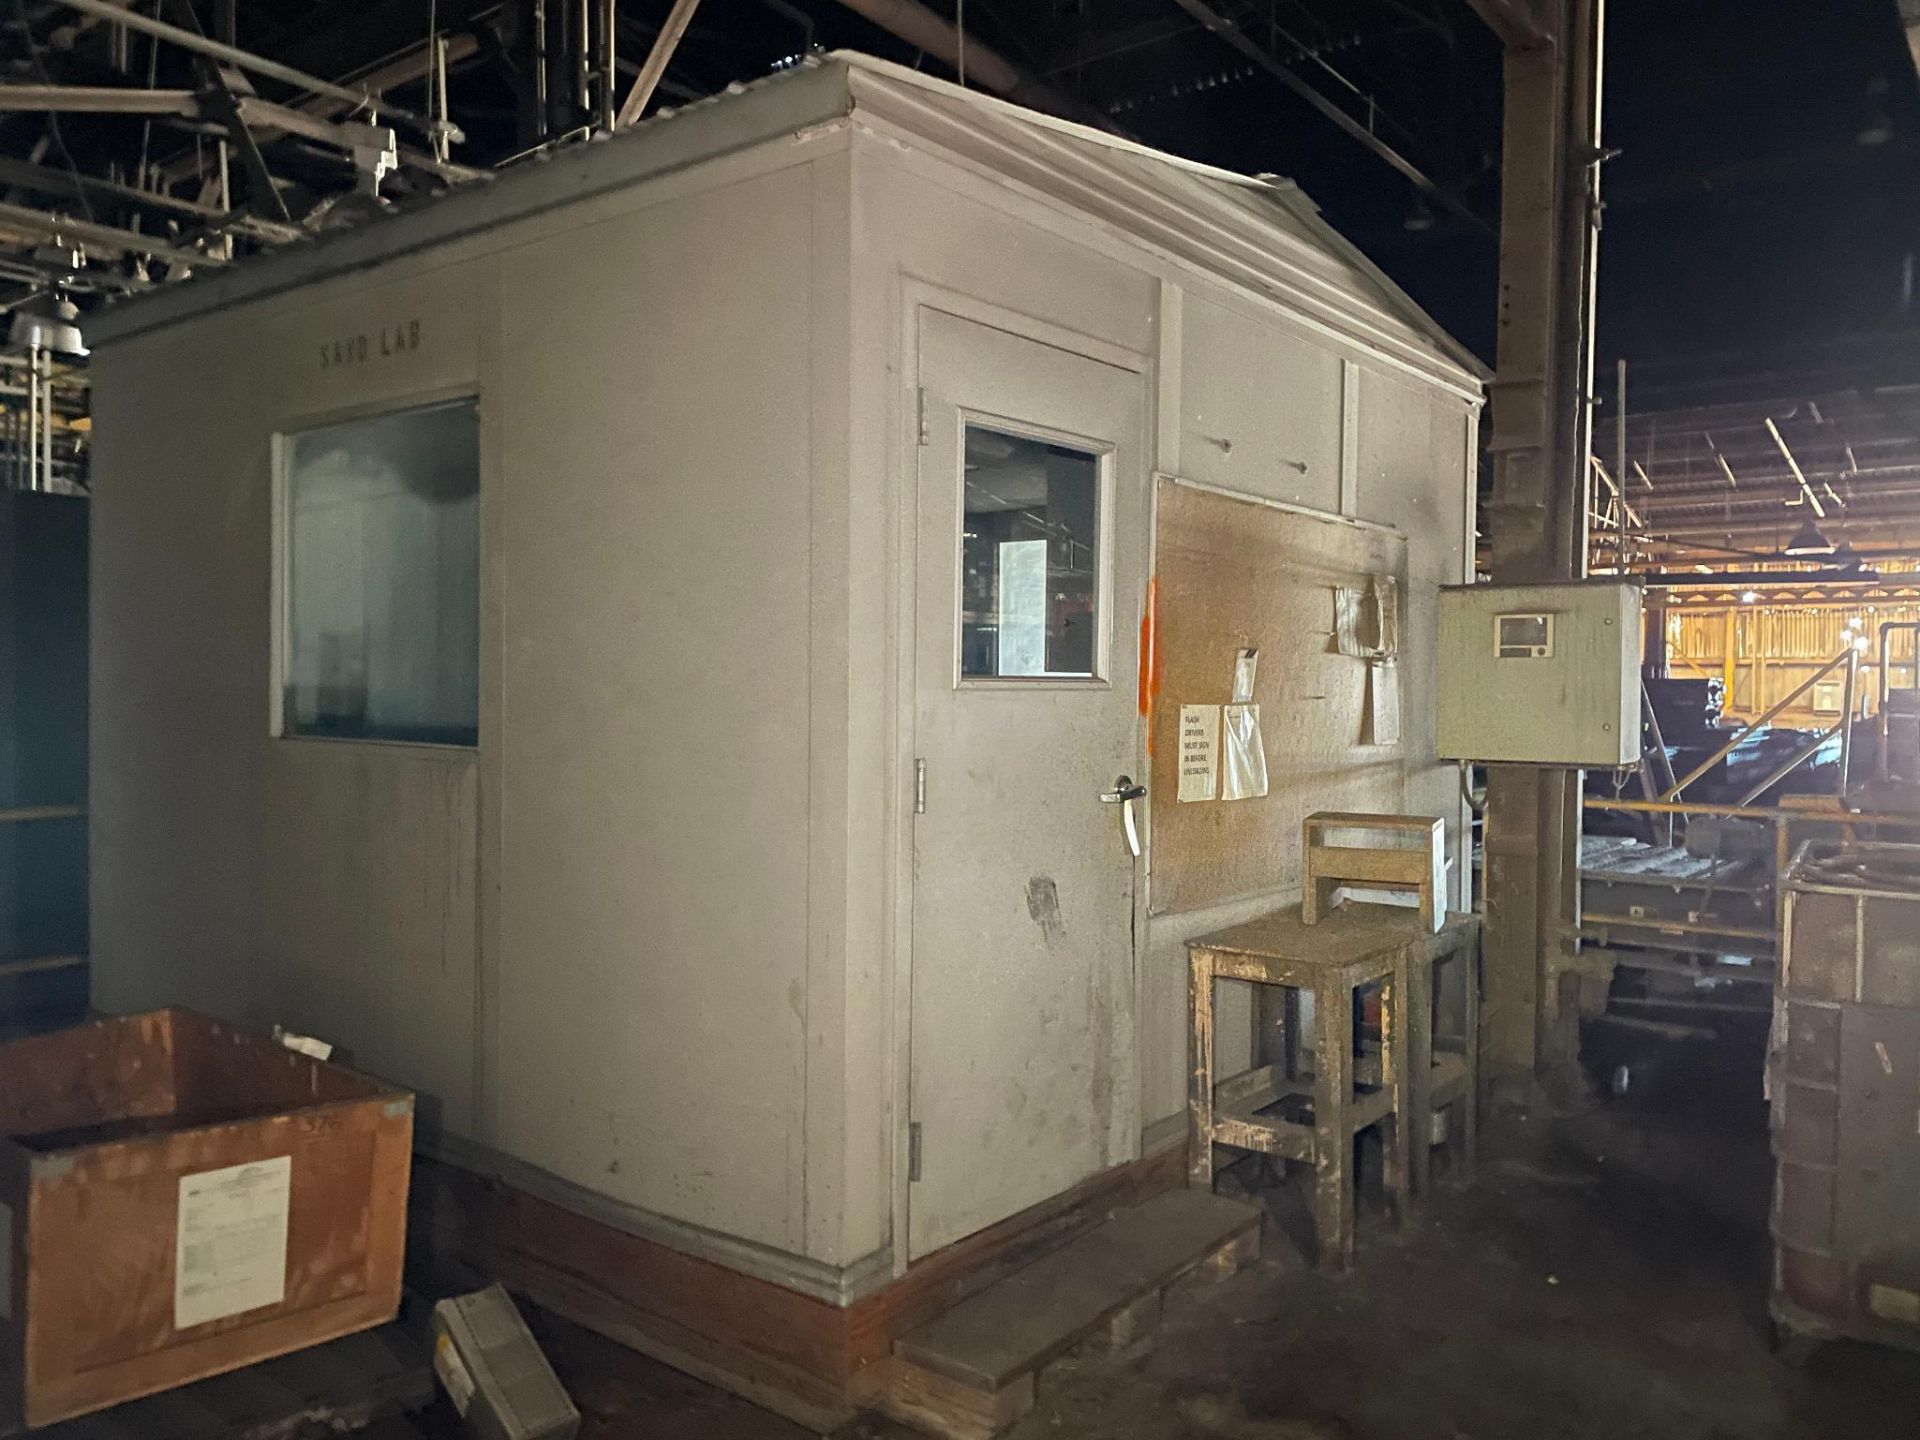 PORTABLE OFFICE BUILDING, w/ electric & AC, approx. 12' x 12' (cabinet & tables not included)